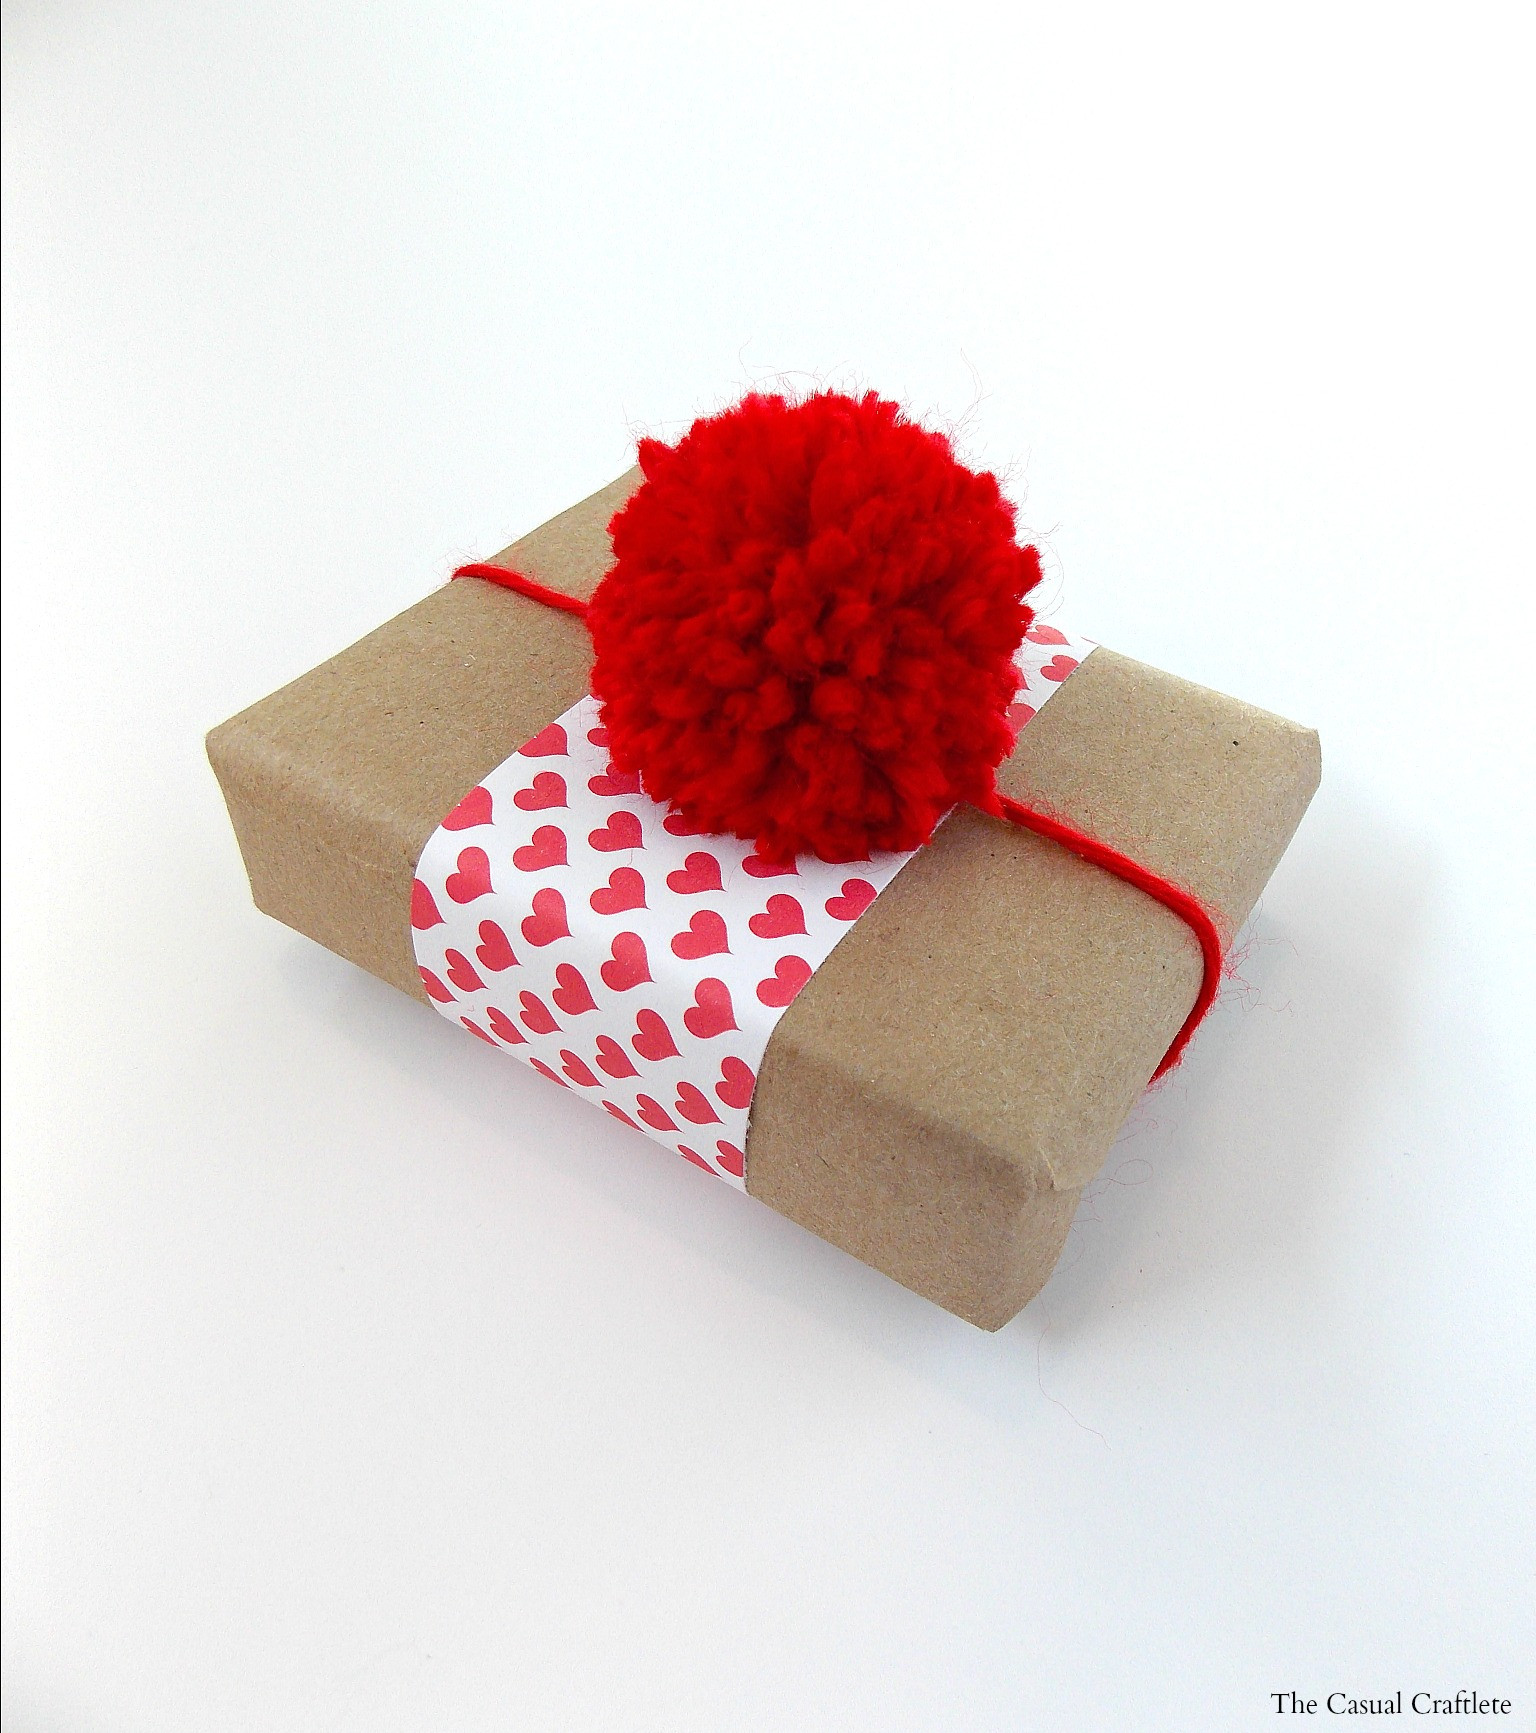 Valentine Gift Wrapping Ideas
 4 Valentines Gift Wrap Ideas Purely Katie